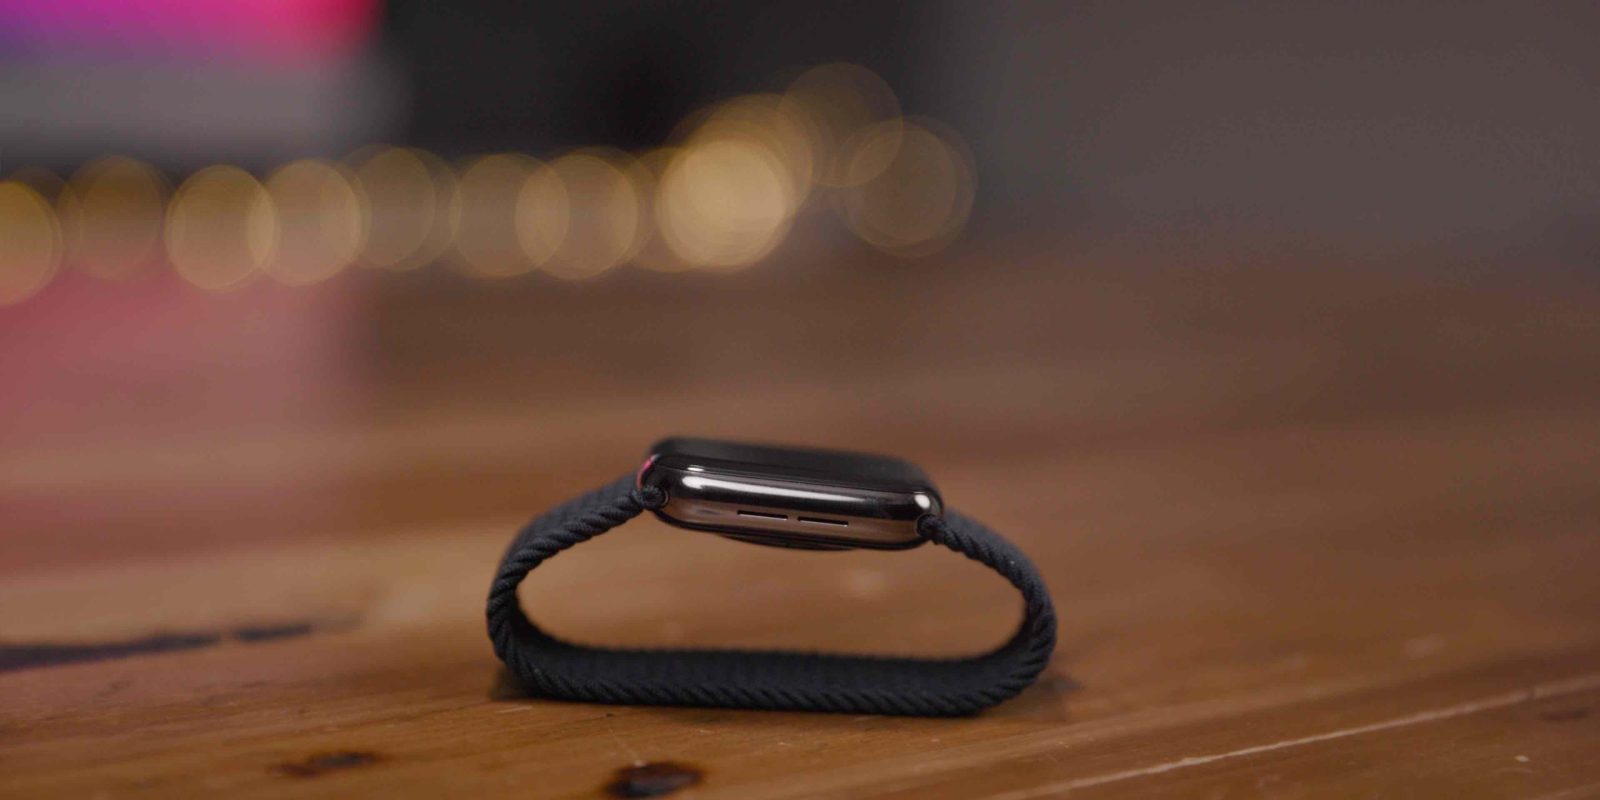 Apple watch not charging? Here are 5 ways to fix it